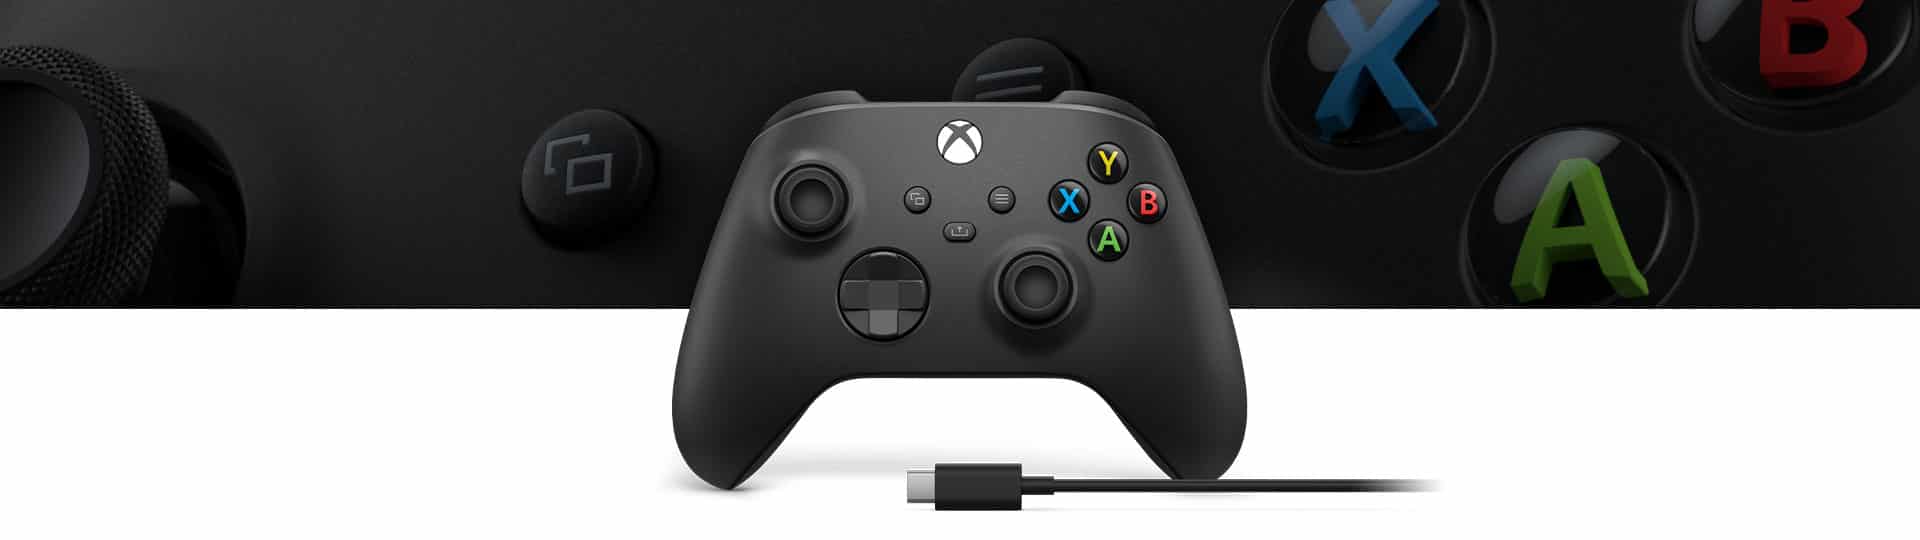 Xbox Wireless Controller + USB-C Cable - Carbon Black Cover View